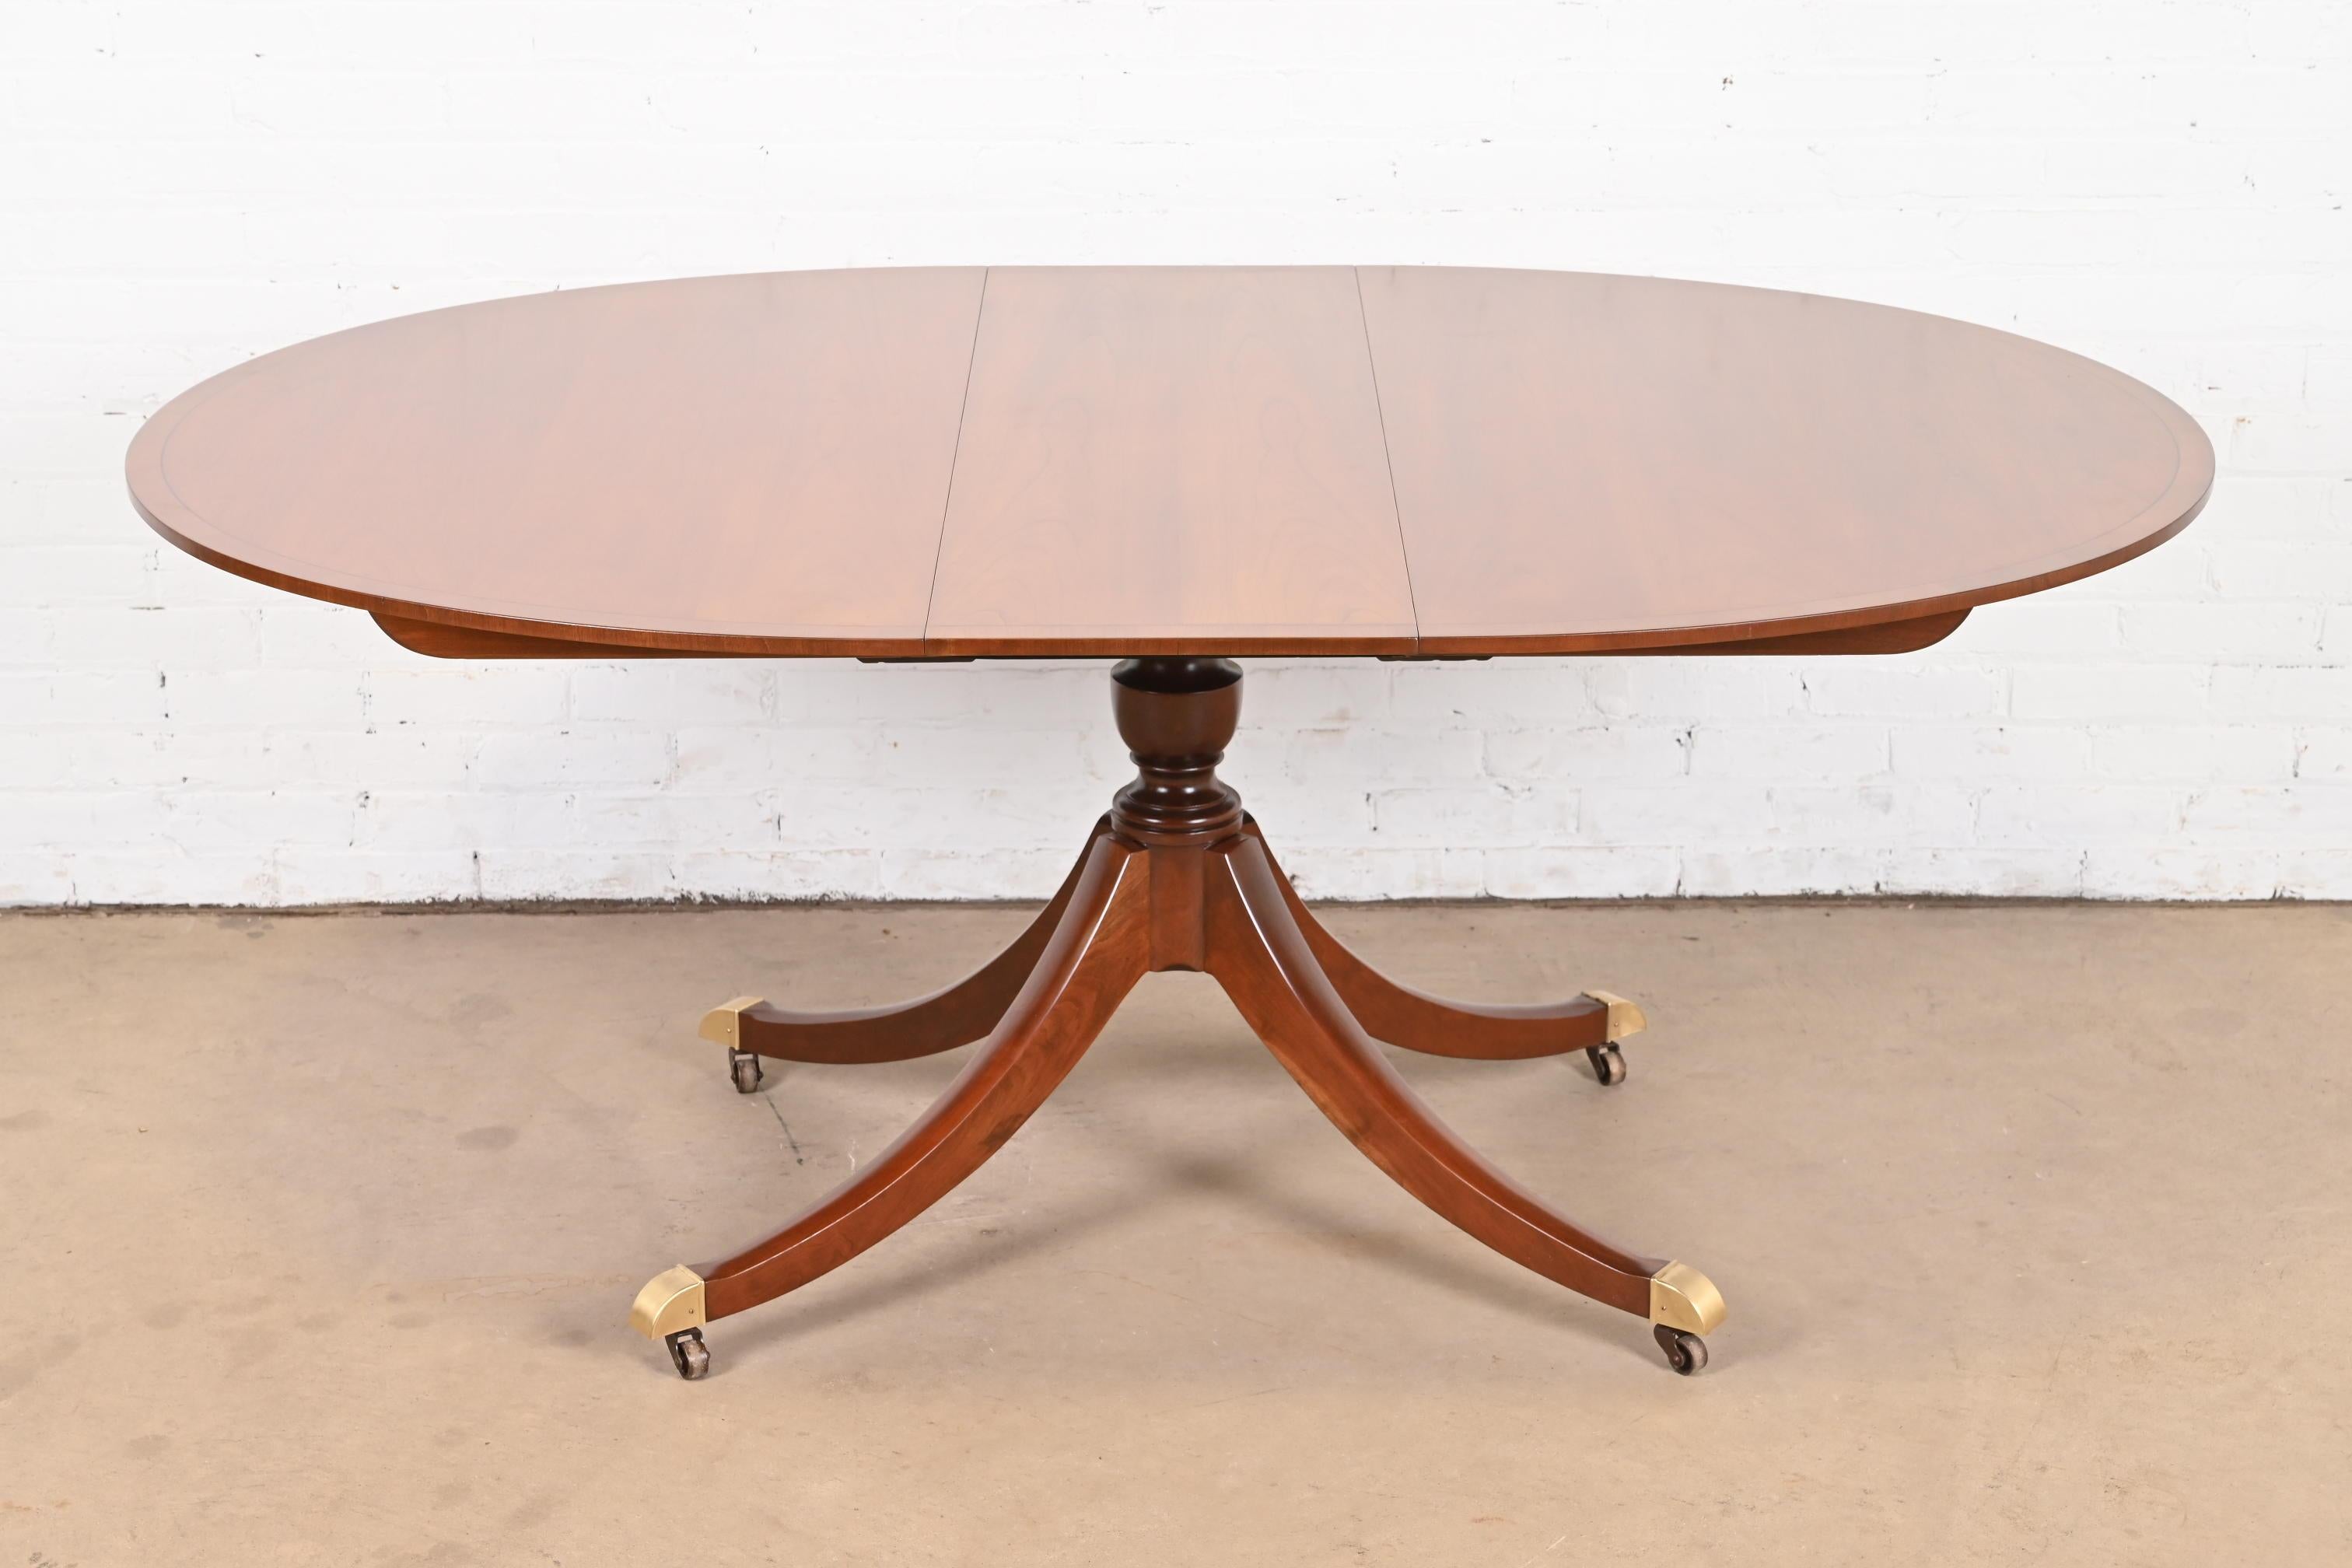 An exceptional Georgian or Regency style single pedestal extension dining table

By Baker Furniture

USA, Circa 1980s

Beautiful book-matched cherry wood, with ebony string inlay, carved solid cherry wood pedestal, and brass-capped feet on